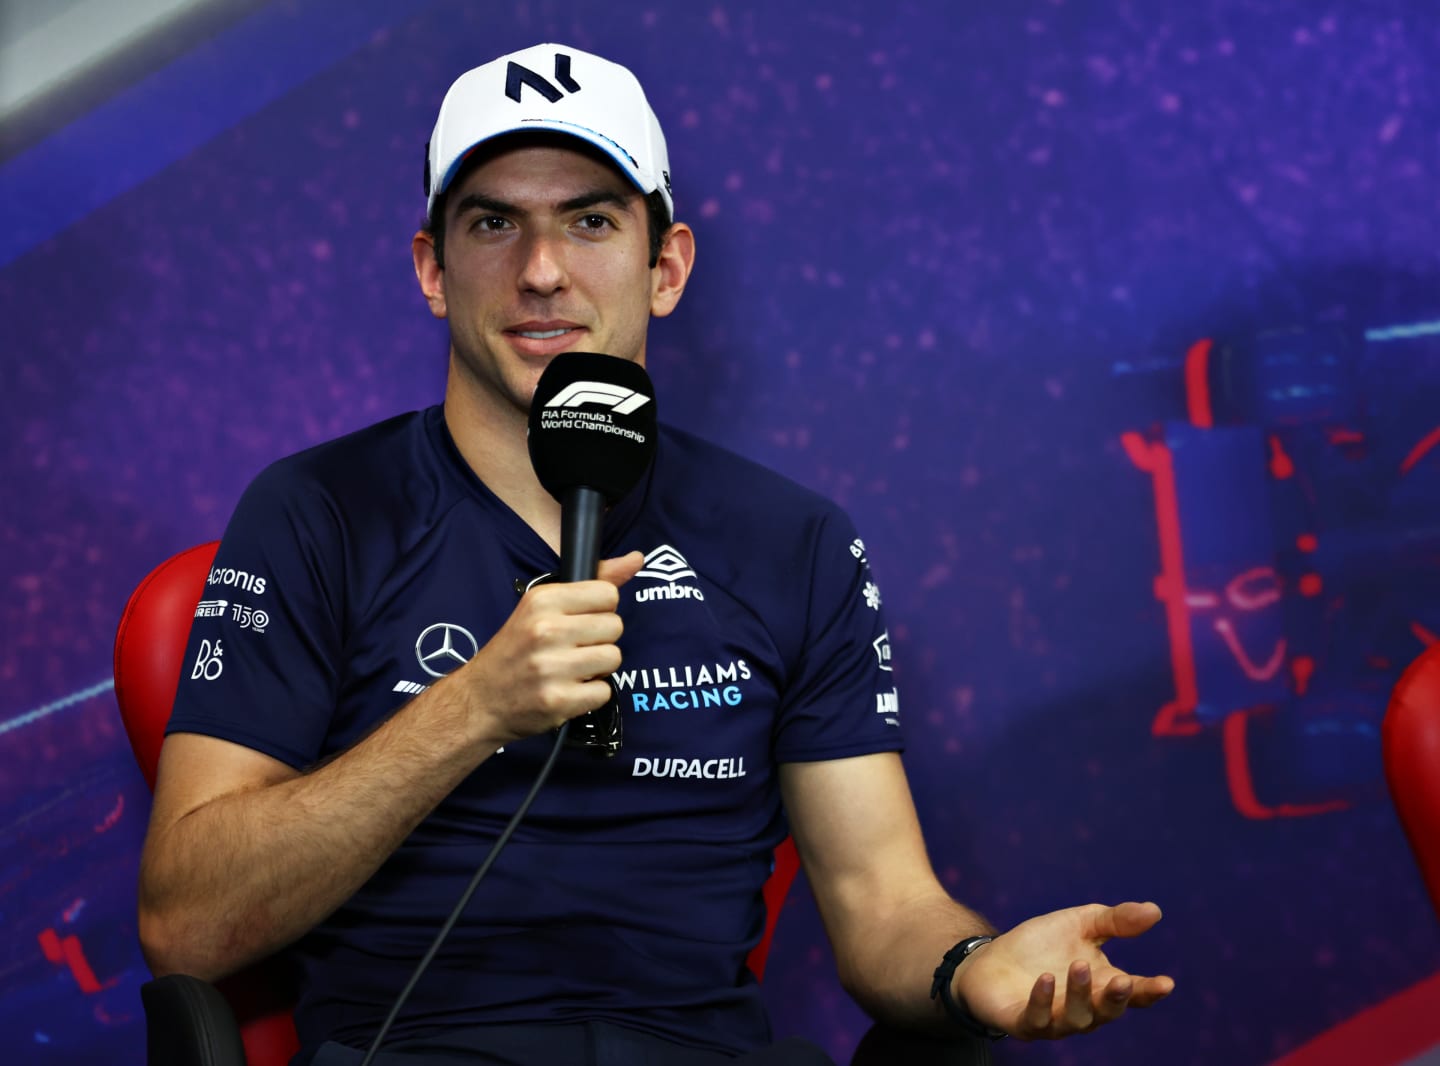 LE CASTELLET, FRANCE - JULY 21: Nicholas Latifi of Canada and Williams talks in the Drivers Press Conference during previews ahead of the F1 Grand Prix of France at Circuit Paul Ricard on July 21, 2022 in Le Castellet, France. (Photo by Bryn Lennon/Getty Images)